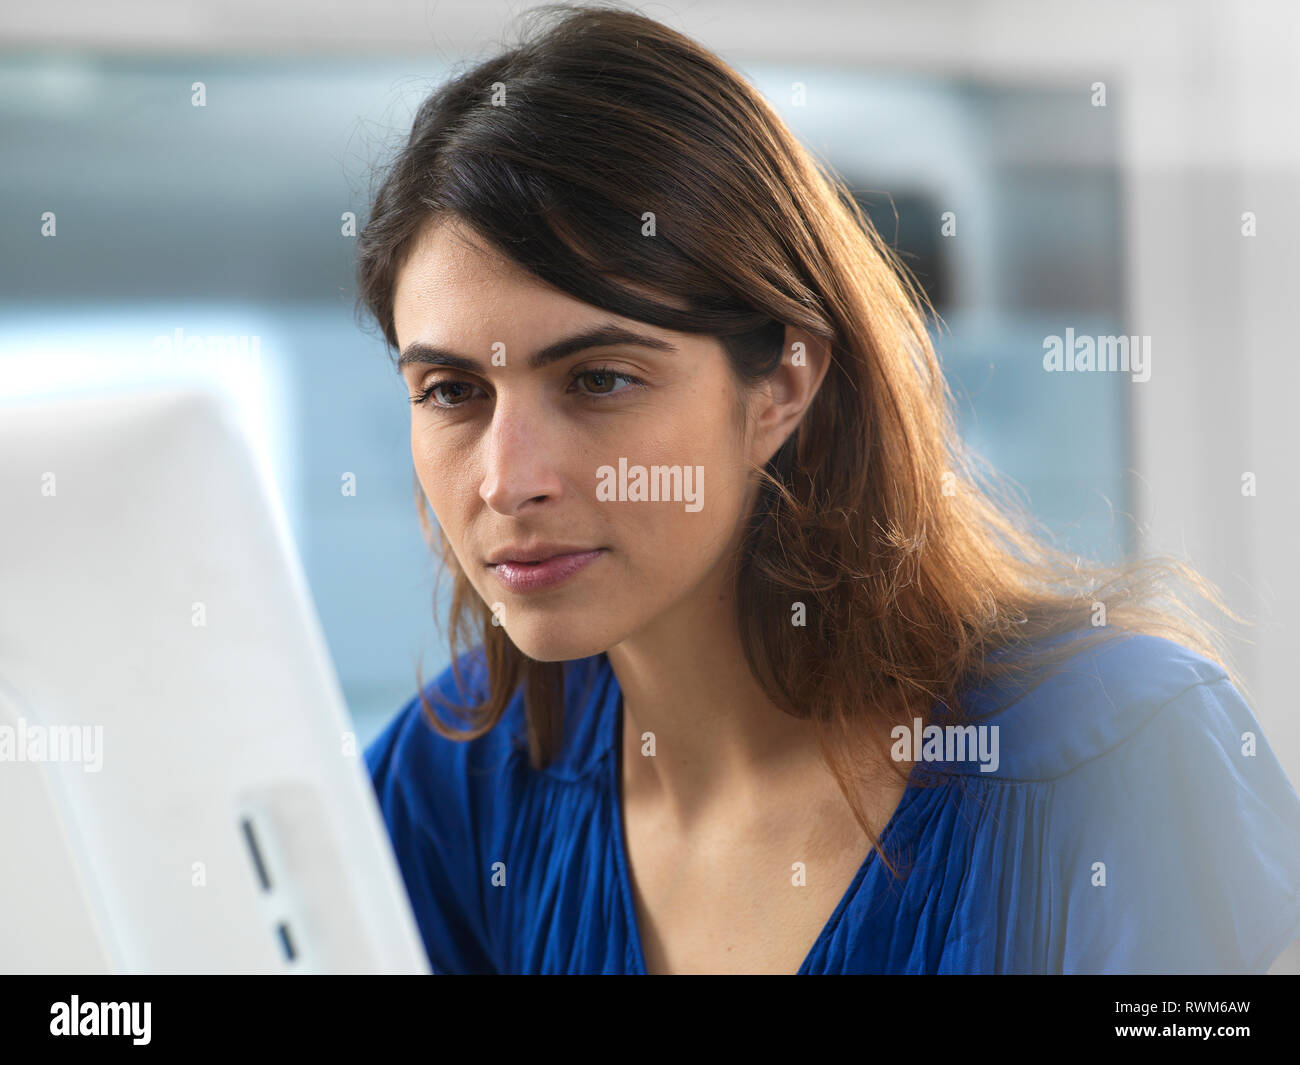 Woman working at computer in office Banque D'Images